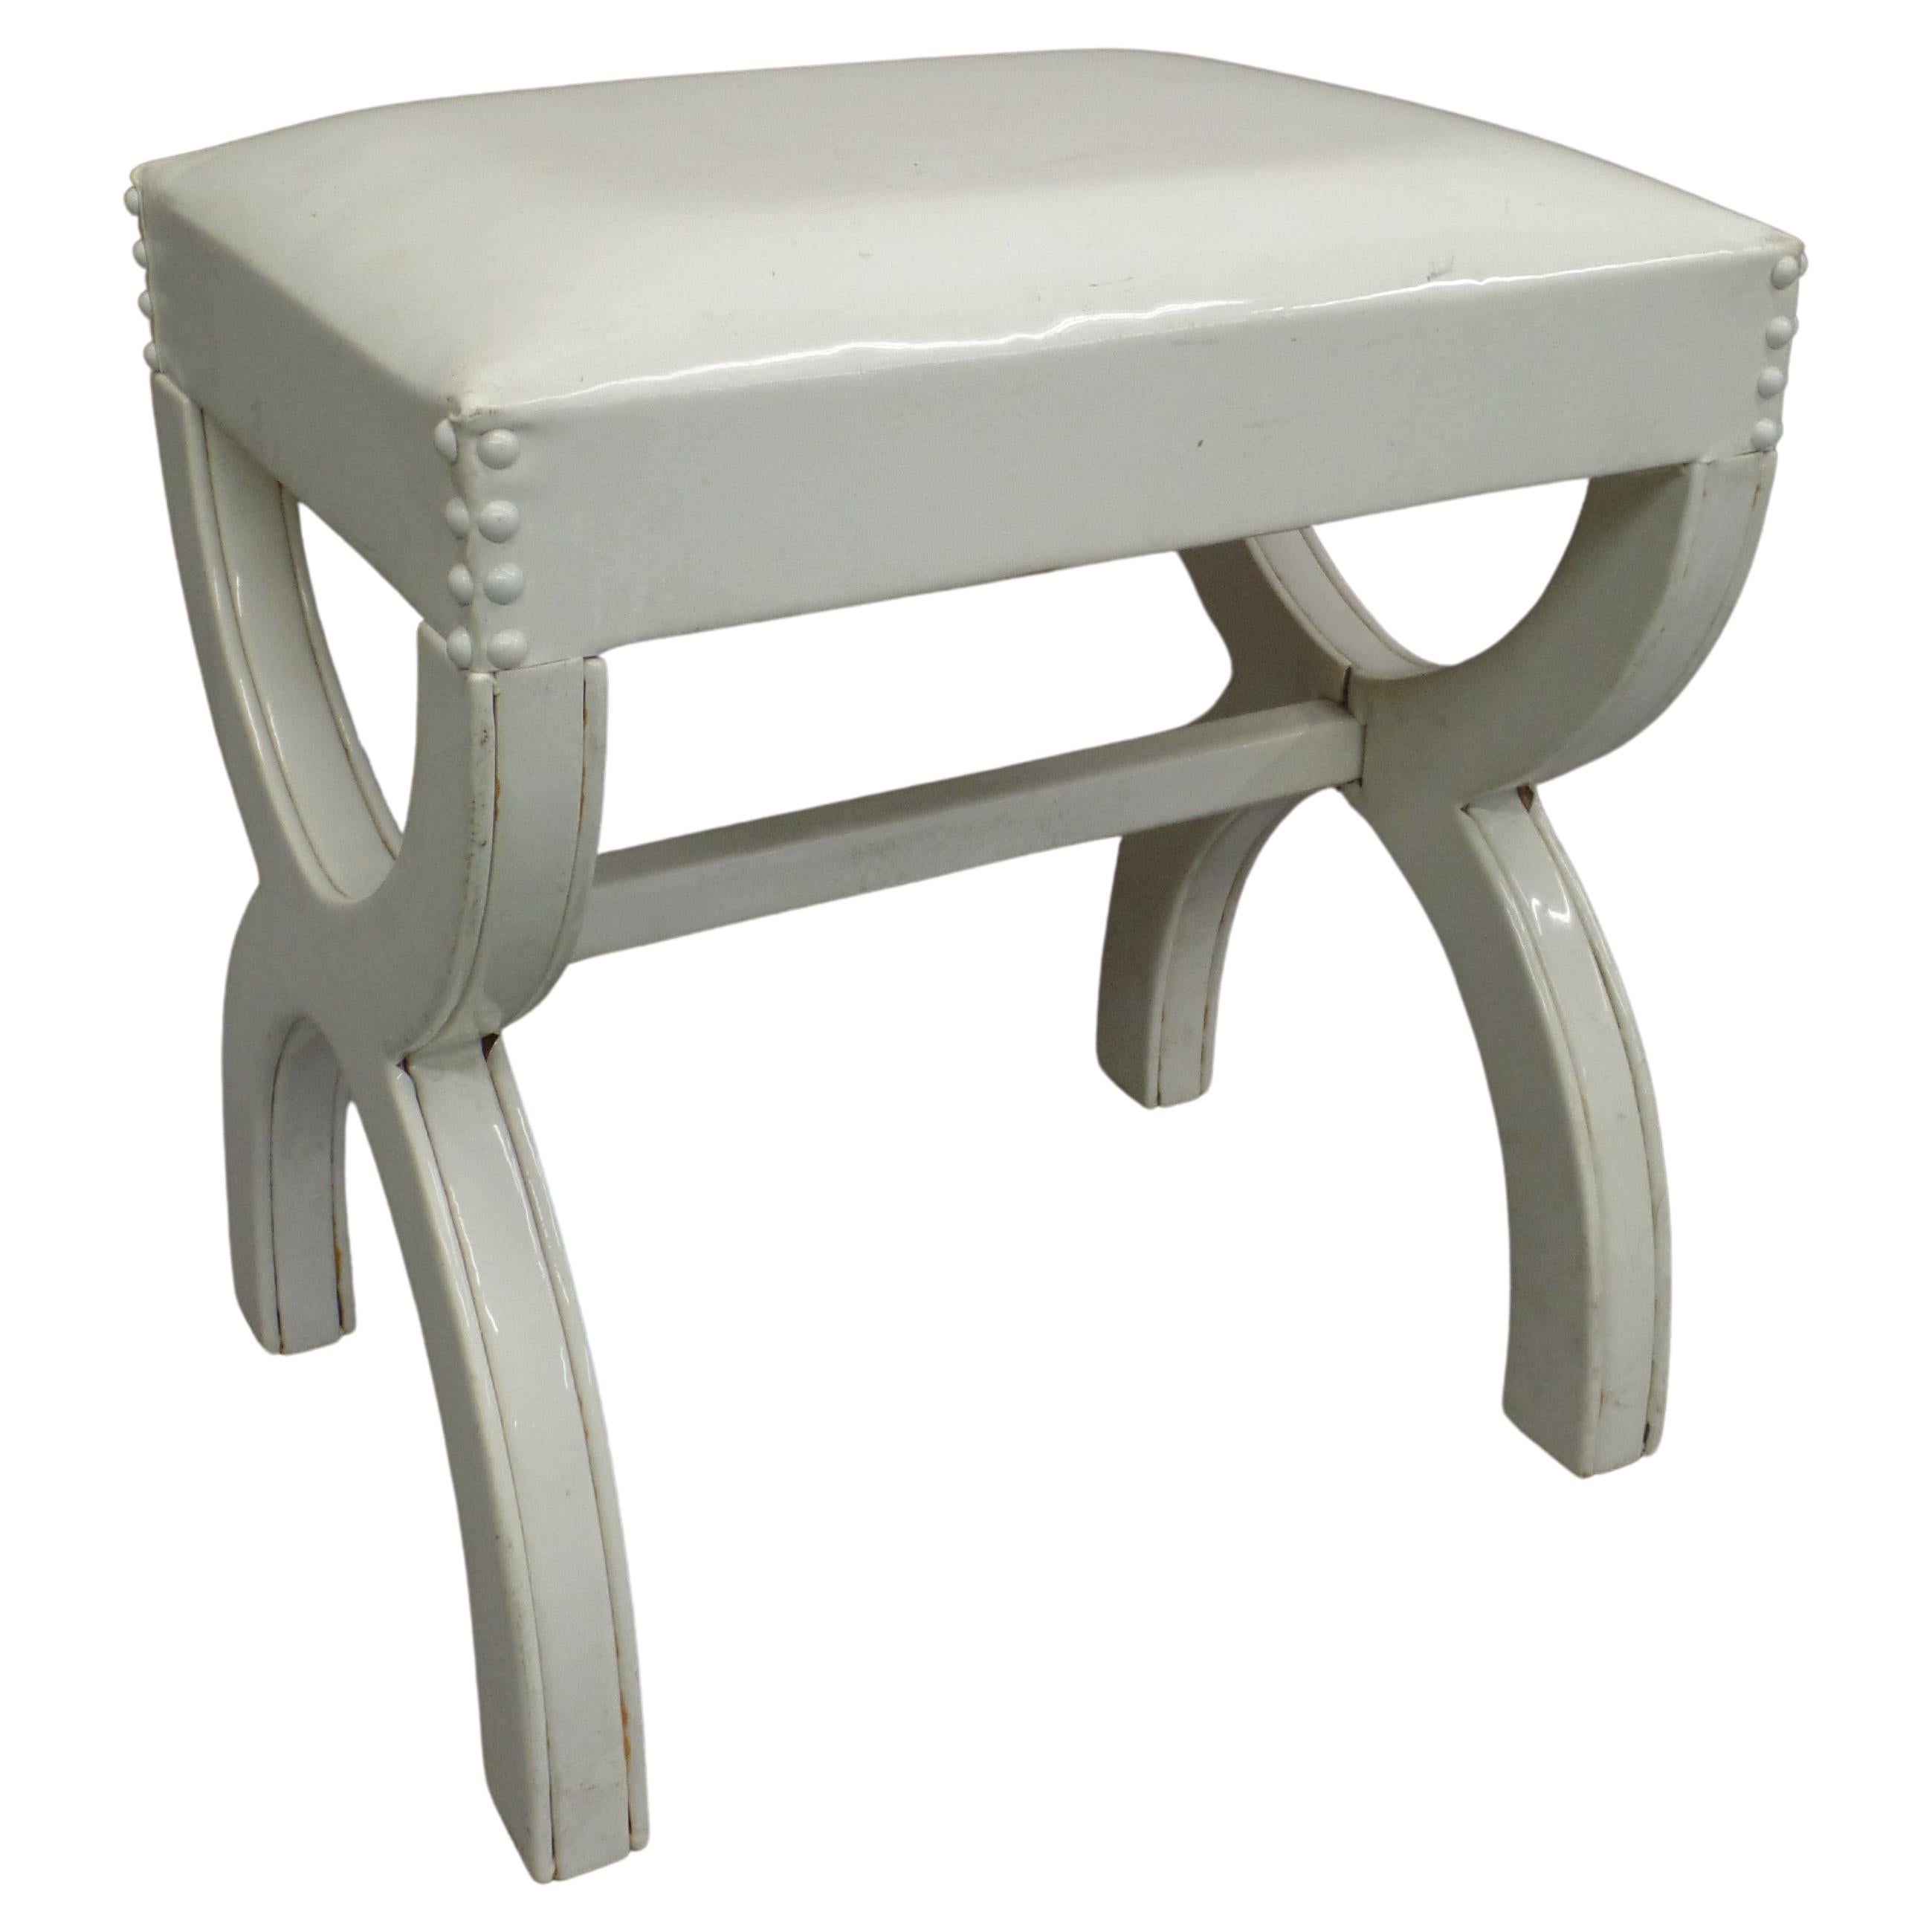 An Elegant French Midcentury Bench or Stool in the Modern Neoclassical Style with an X-frame structure. The The stool is original in its total white composition and the use of white vinyl simulated leather elevates it to a unique luxury status. The